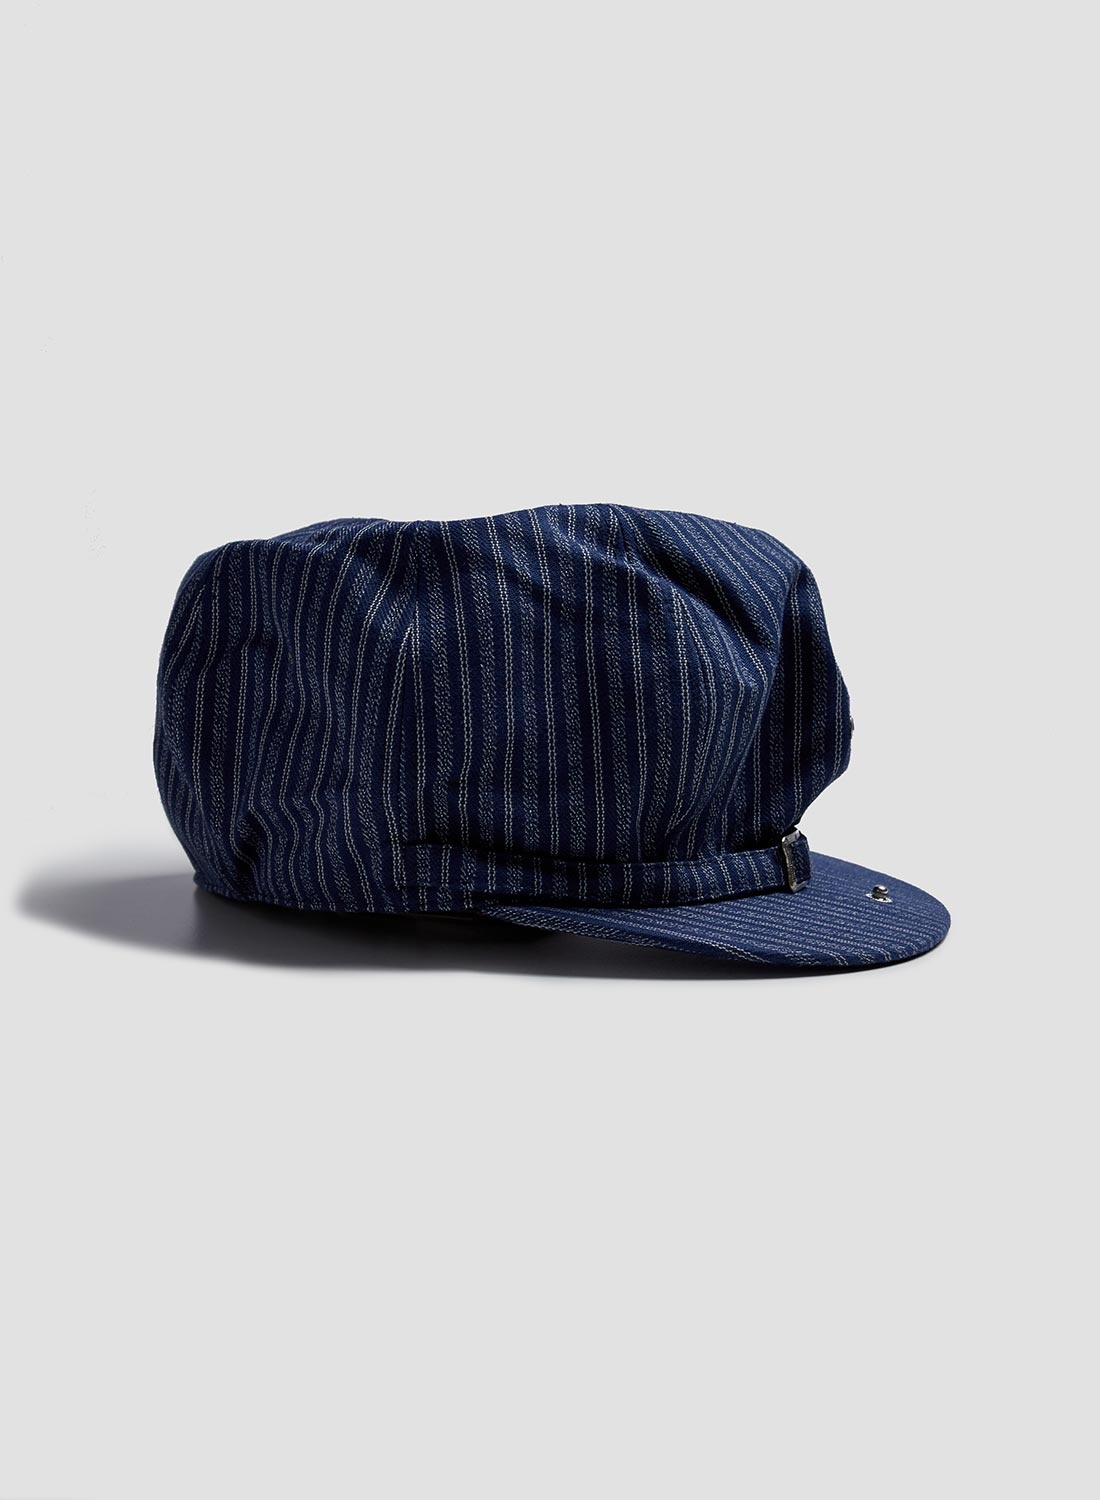 Adjustable Costume 20's Style Casquette Navy - 2